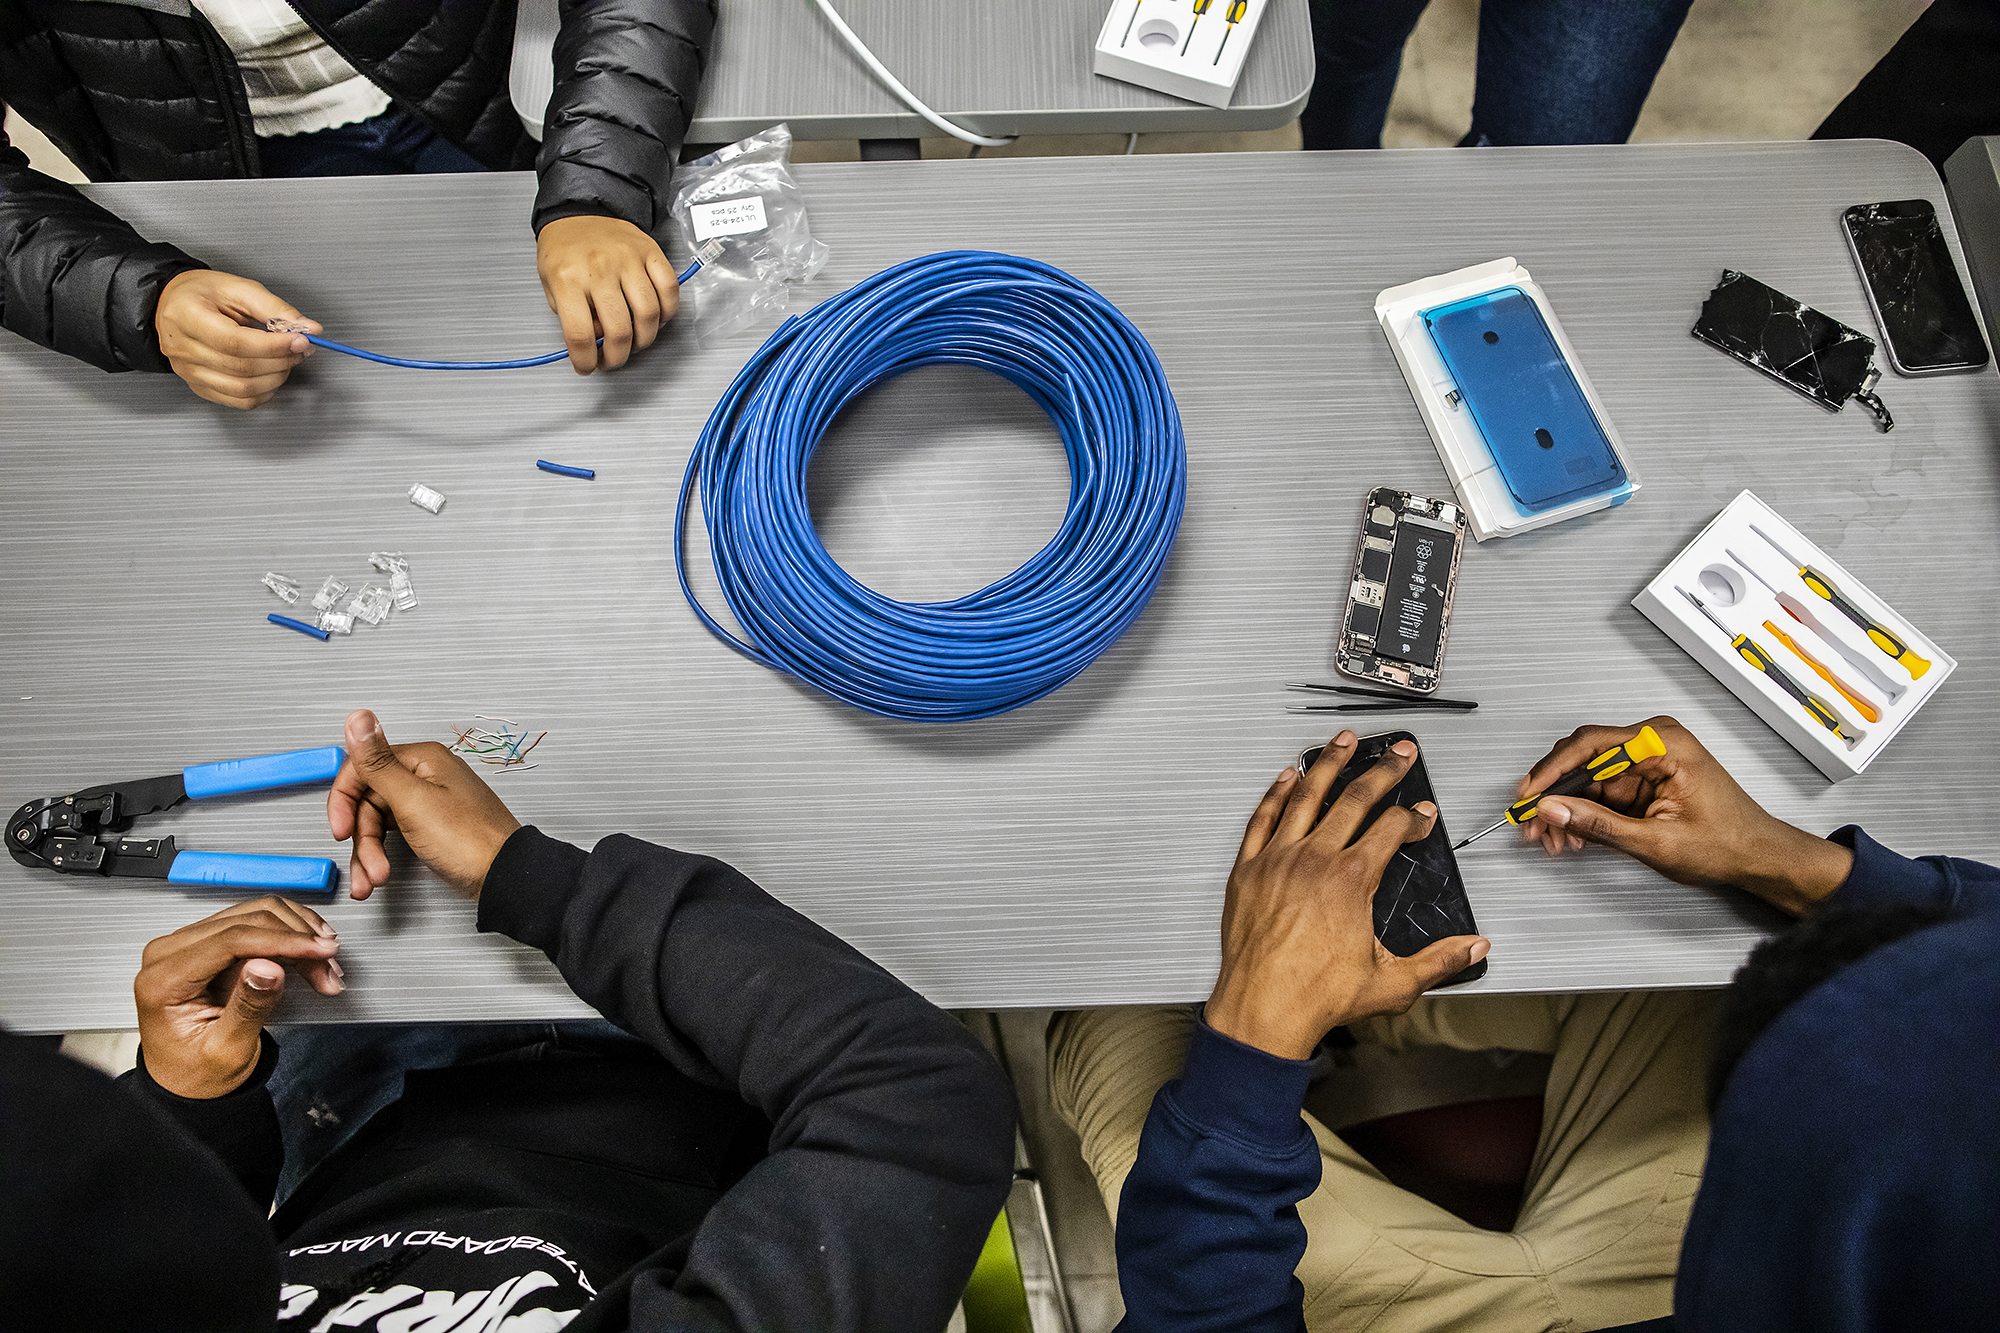 A flat shot of students' hands working on mobile phones and ethernet cords